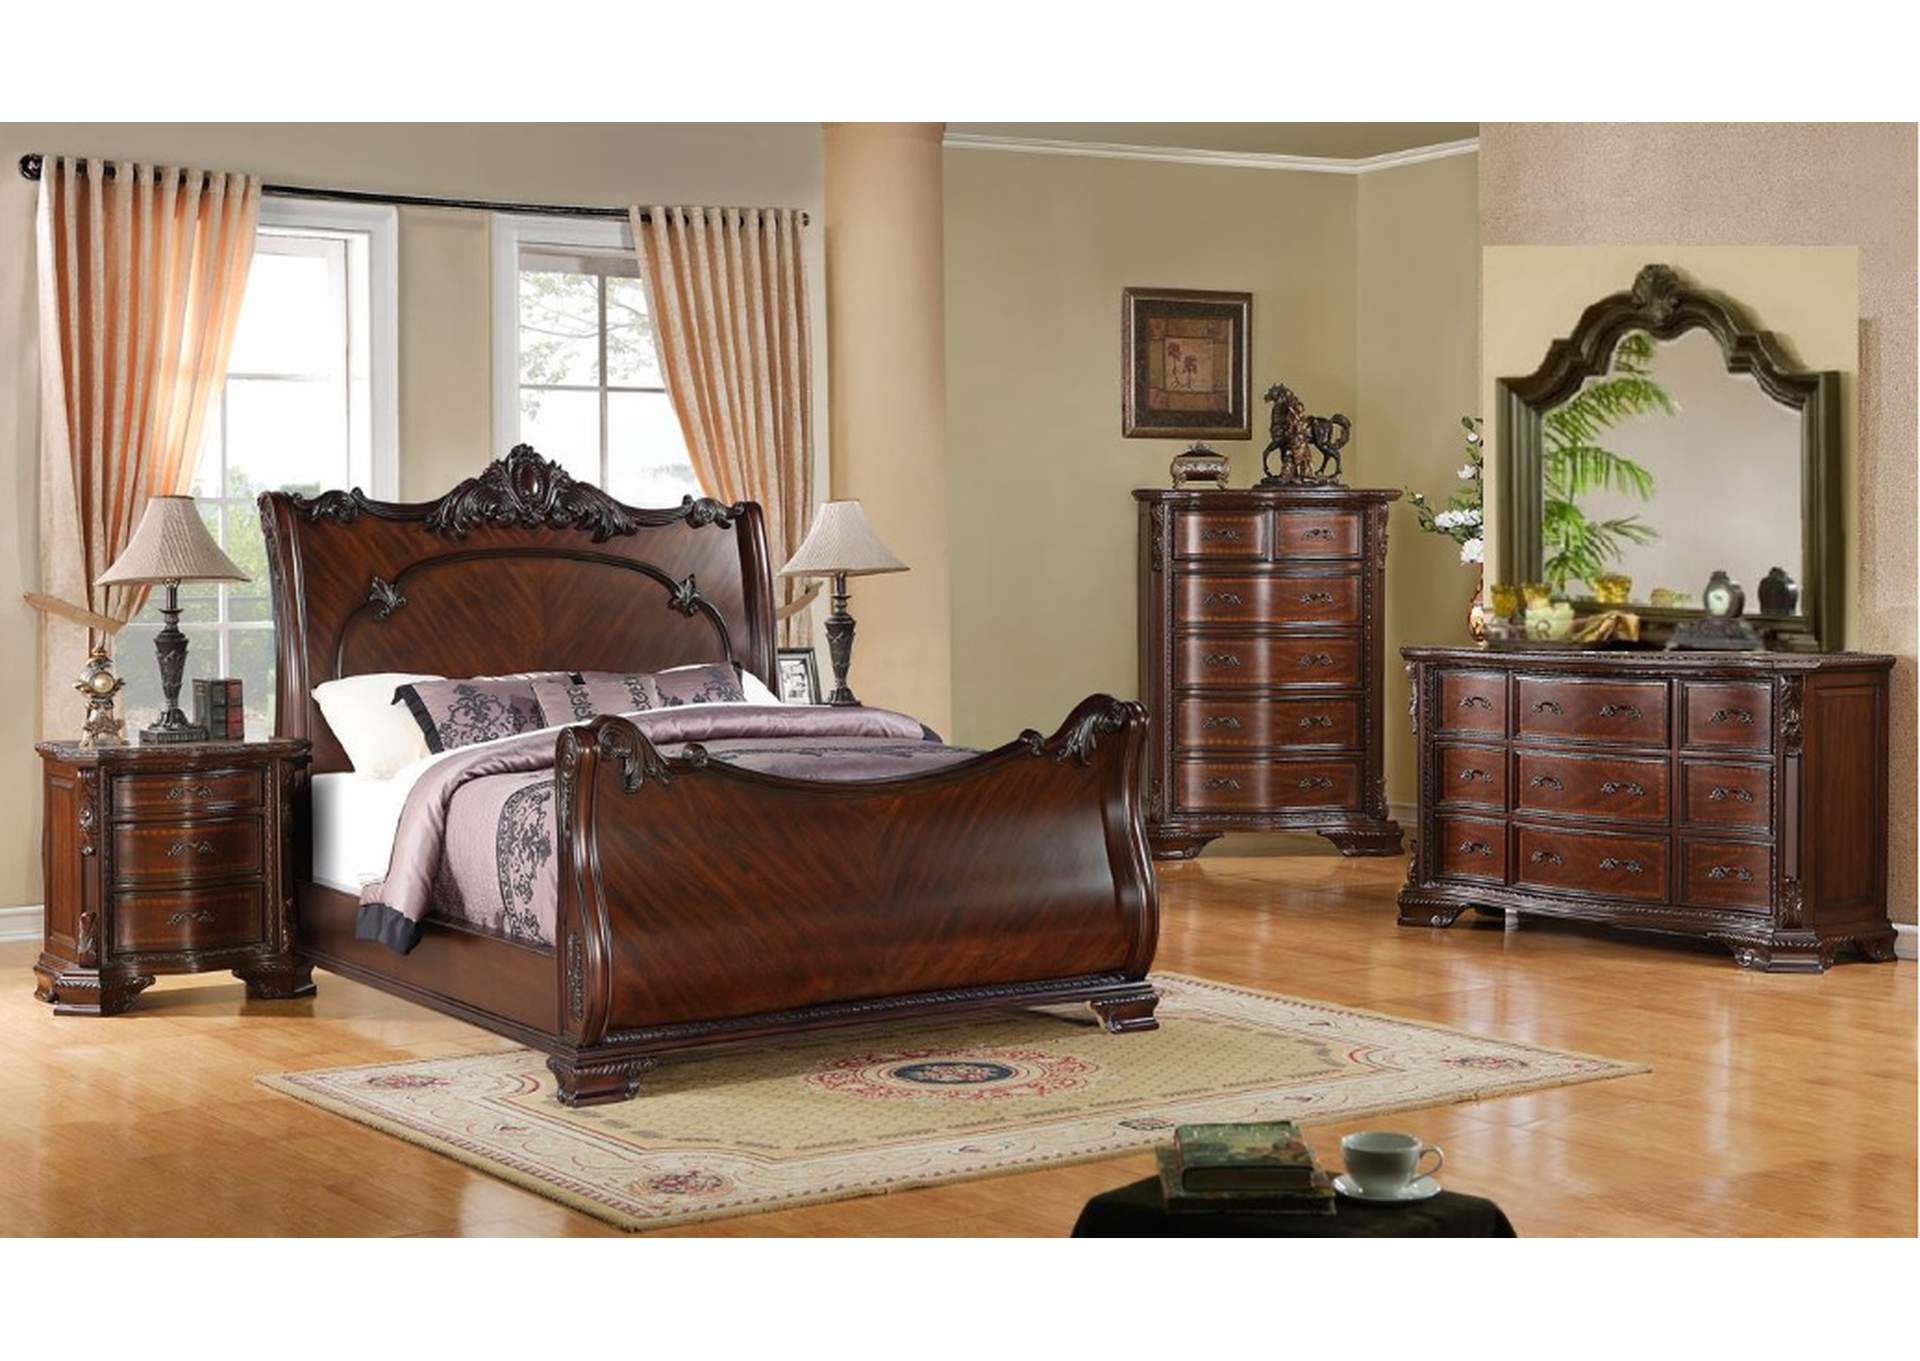 B031 Rich Cherry King Bed,Global Trading